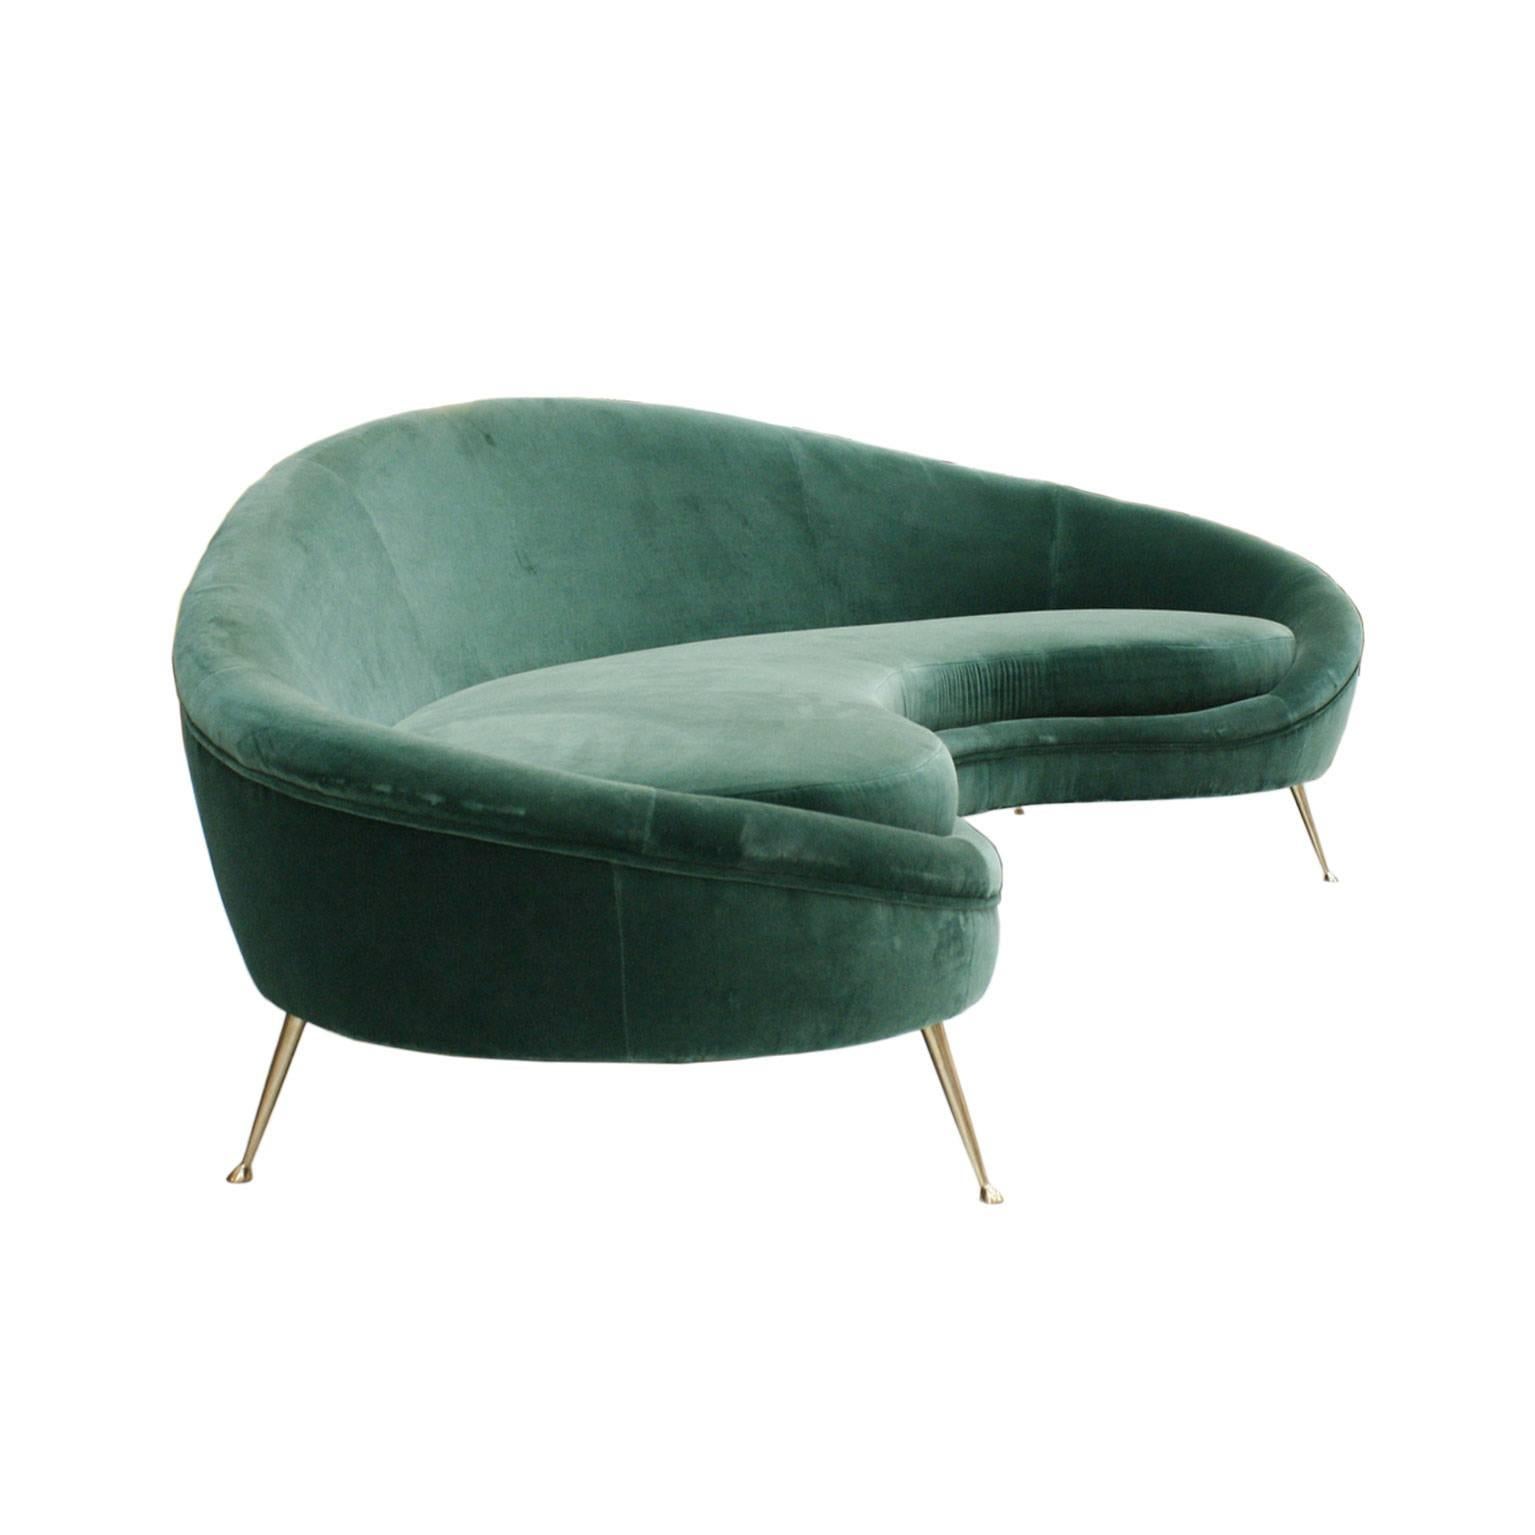 Italian curved four-seat sofa in the style Ico Parisi. Made of solid wood, upholstered in green cotton velvet and brass legs.

Our main target is customer satisfaction, so we include in the price for this item professional and custom made